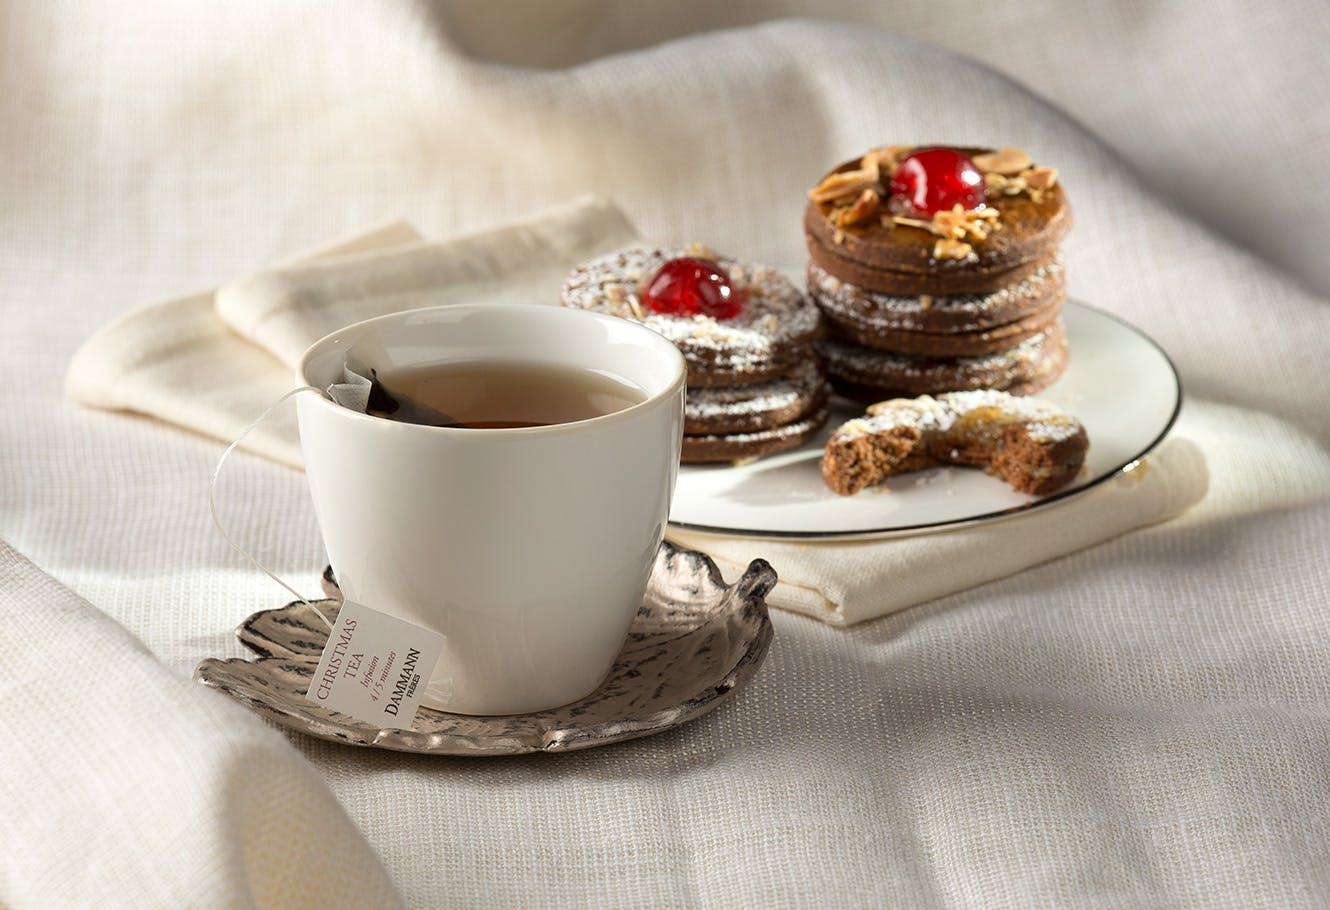 Biscuits with "Noël à Paris" and cup of tea.